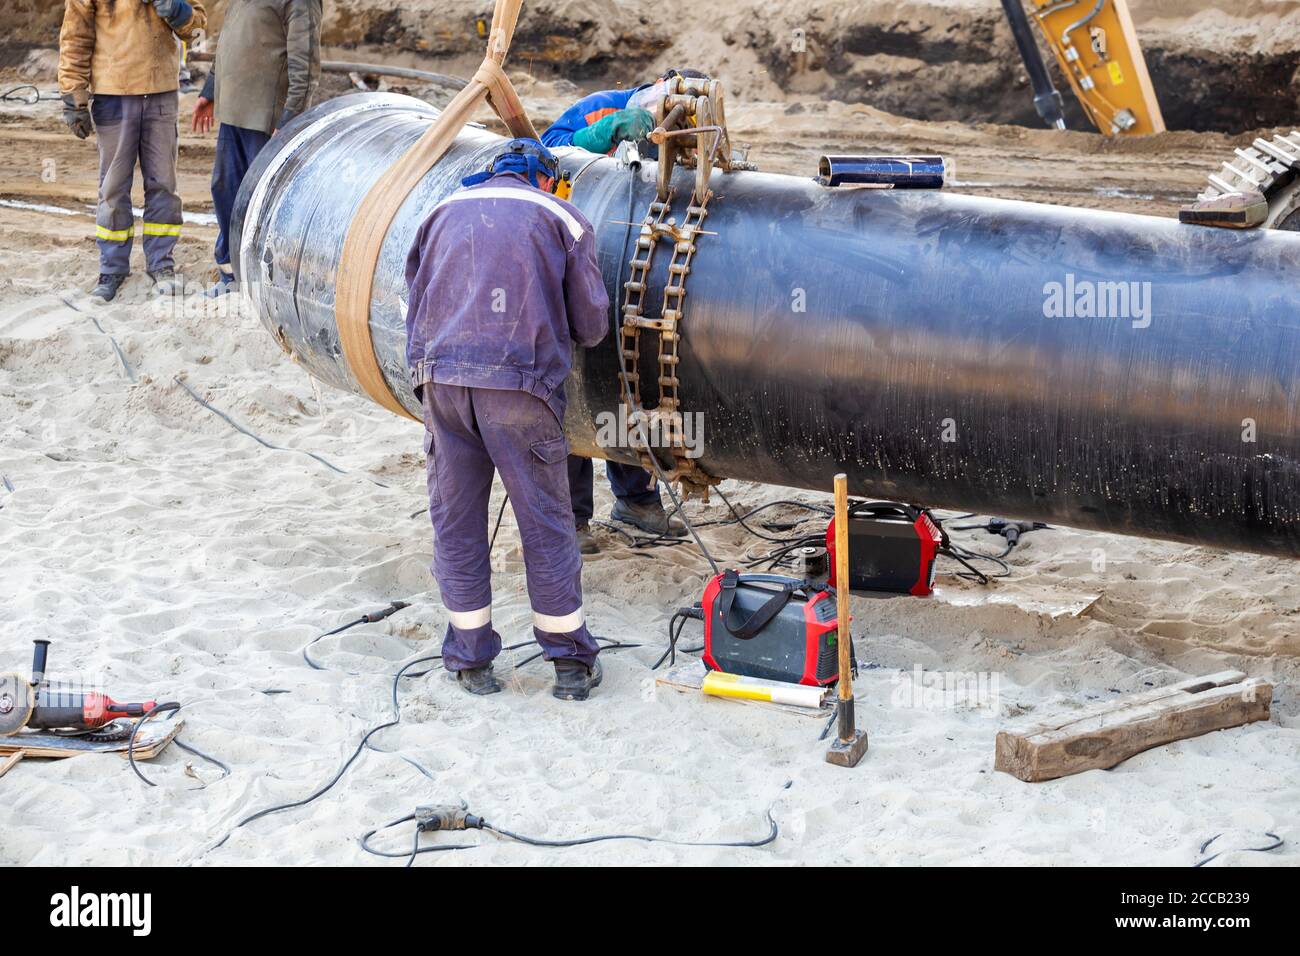 Welder workers  welding big pipes and wearing protective clothing and safety gear. Stock Photo